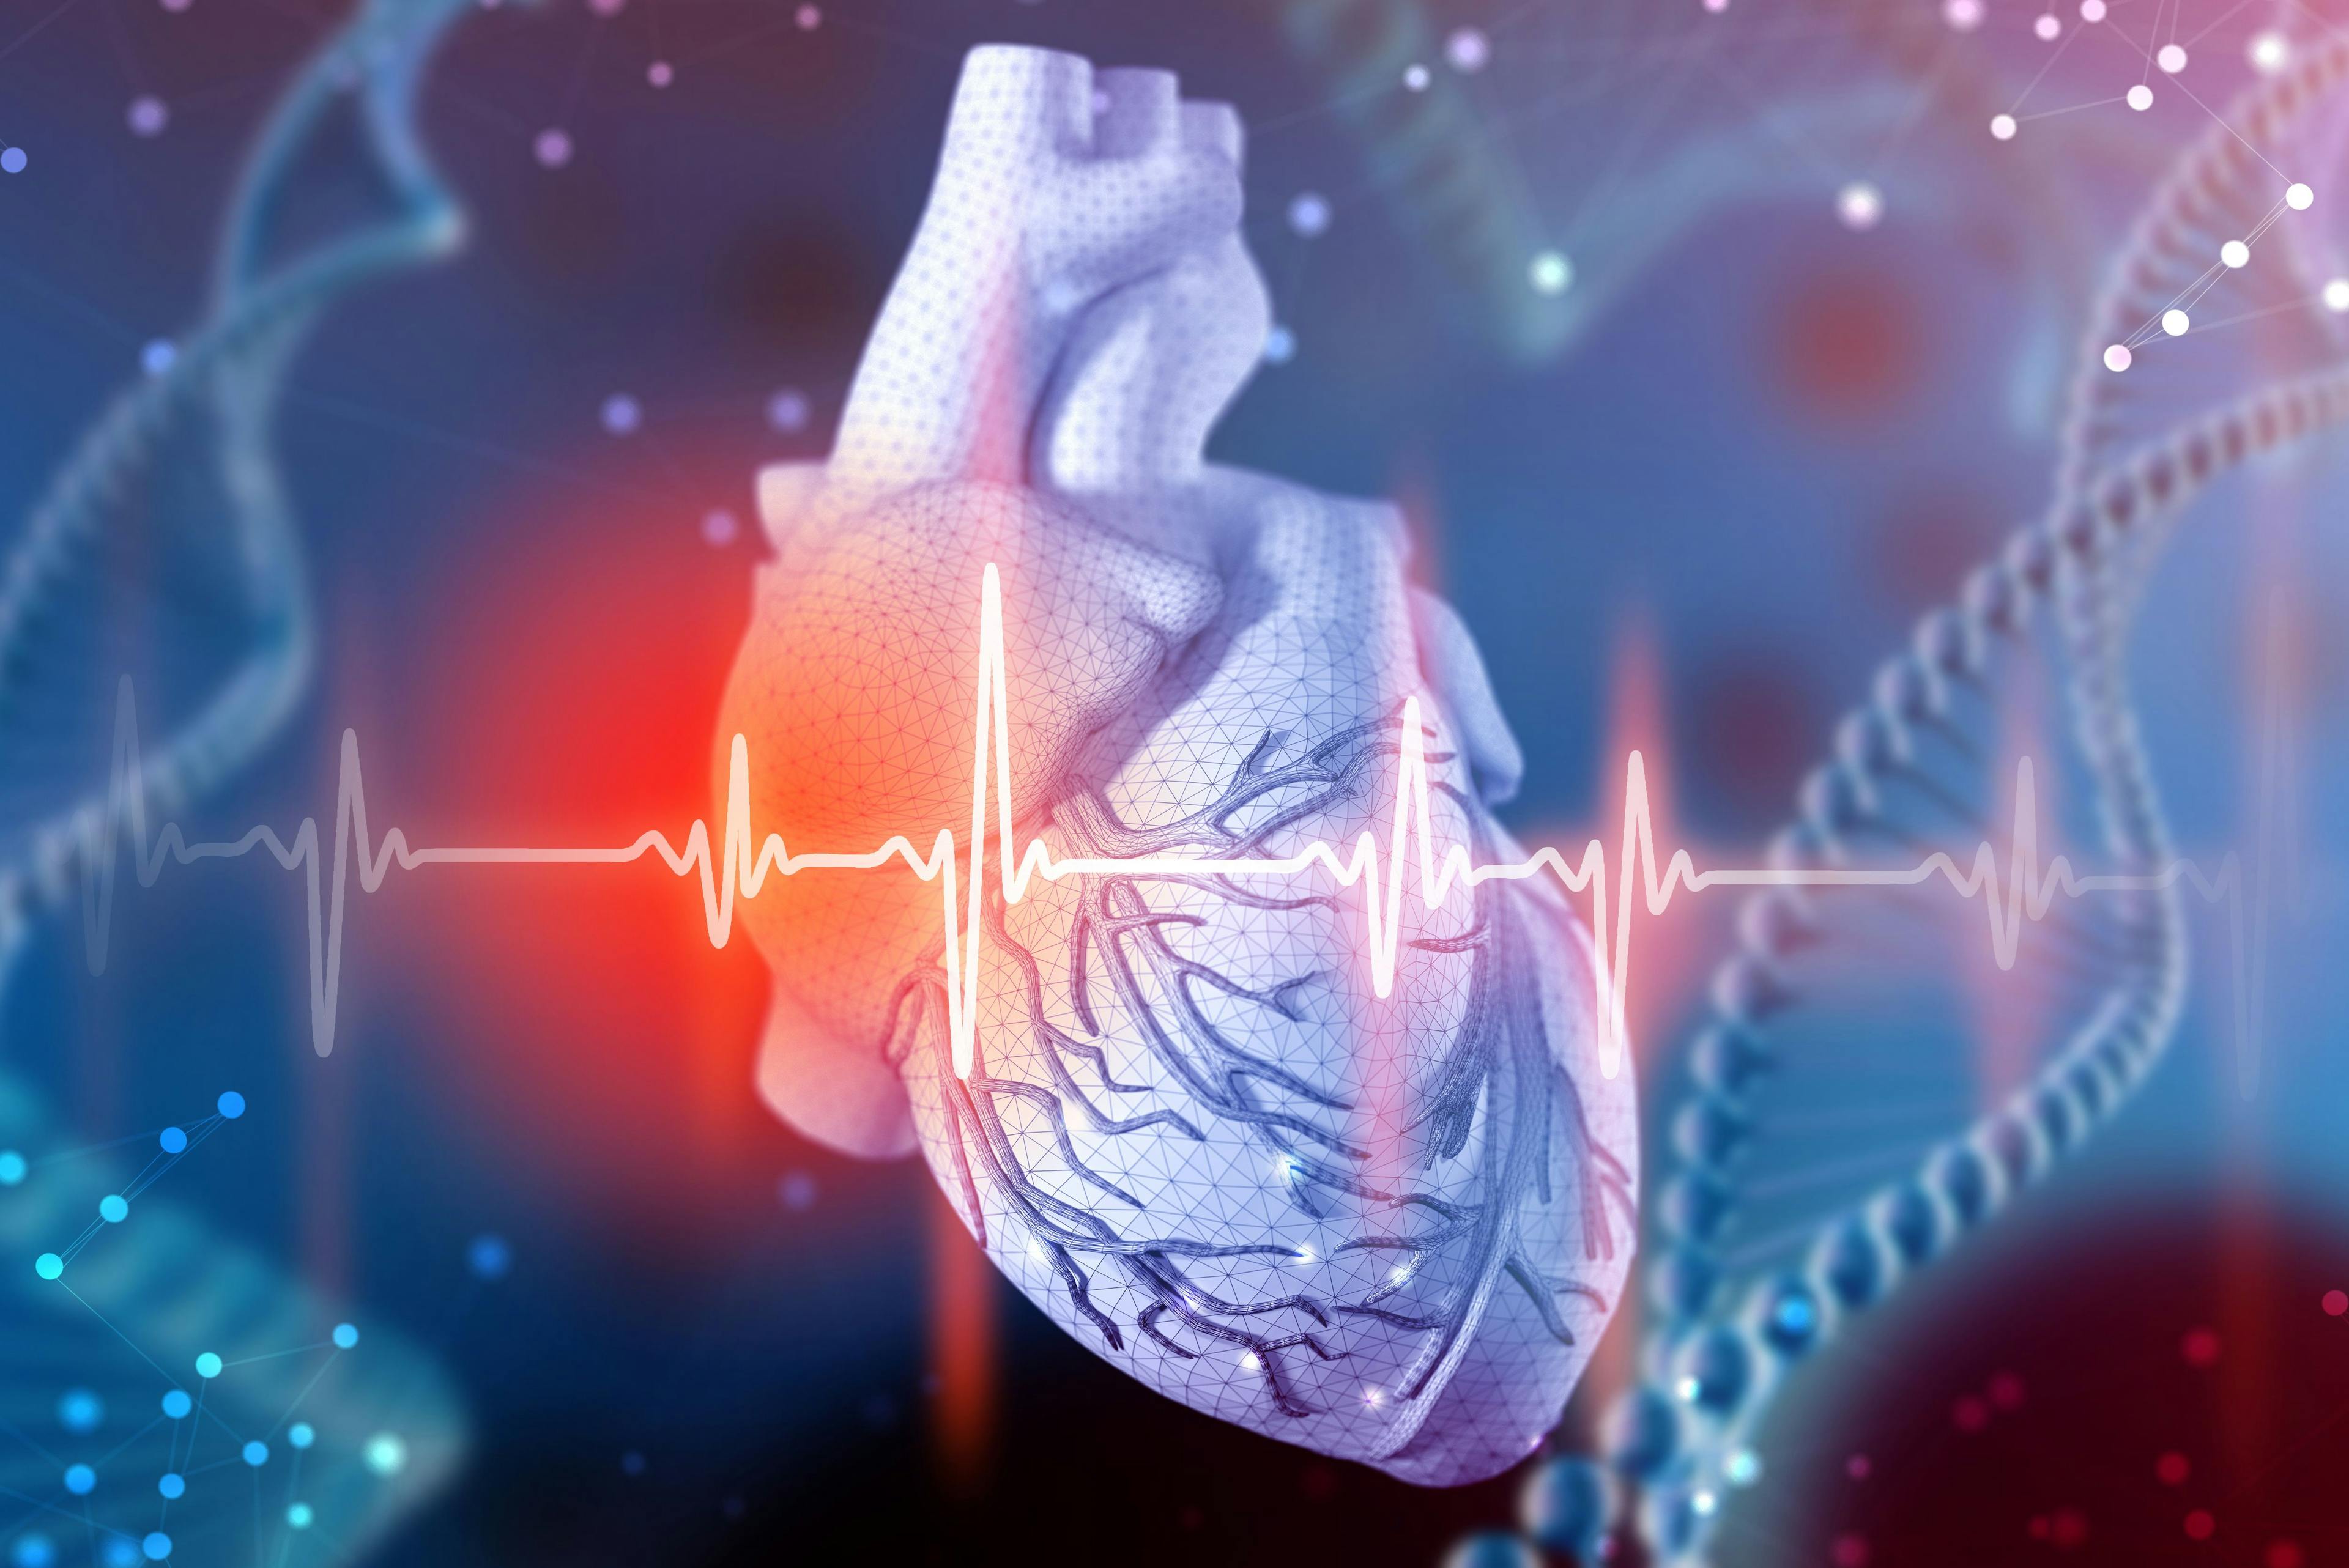 Study: Health Care Providers Should Listen to Patients on Heart Rhythm Disorder Treatment